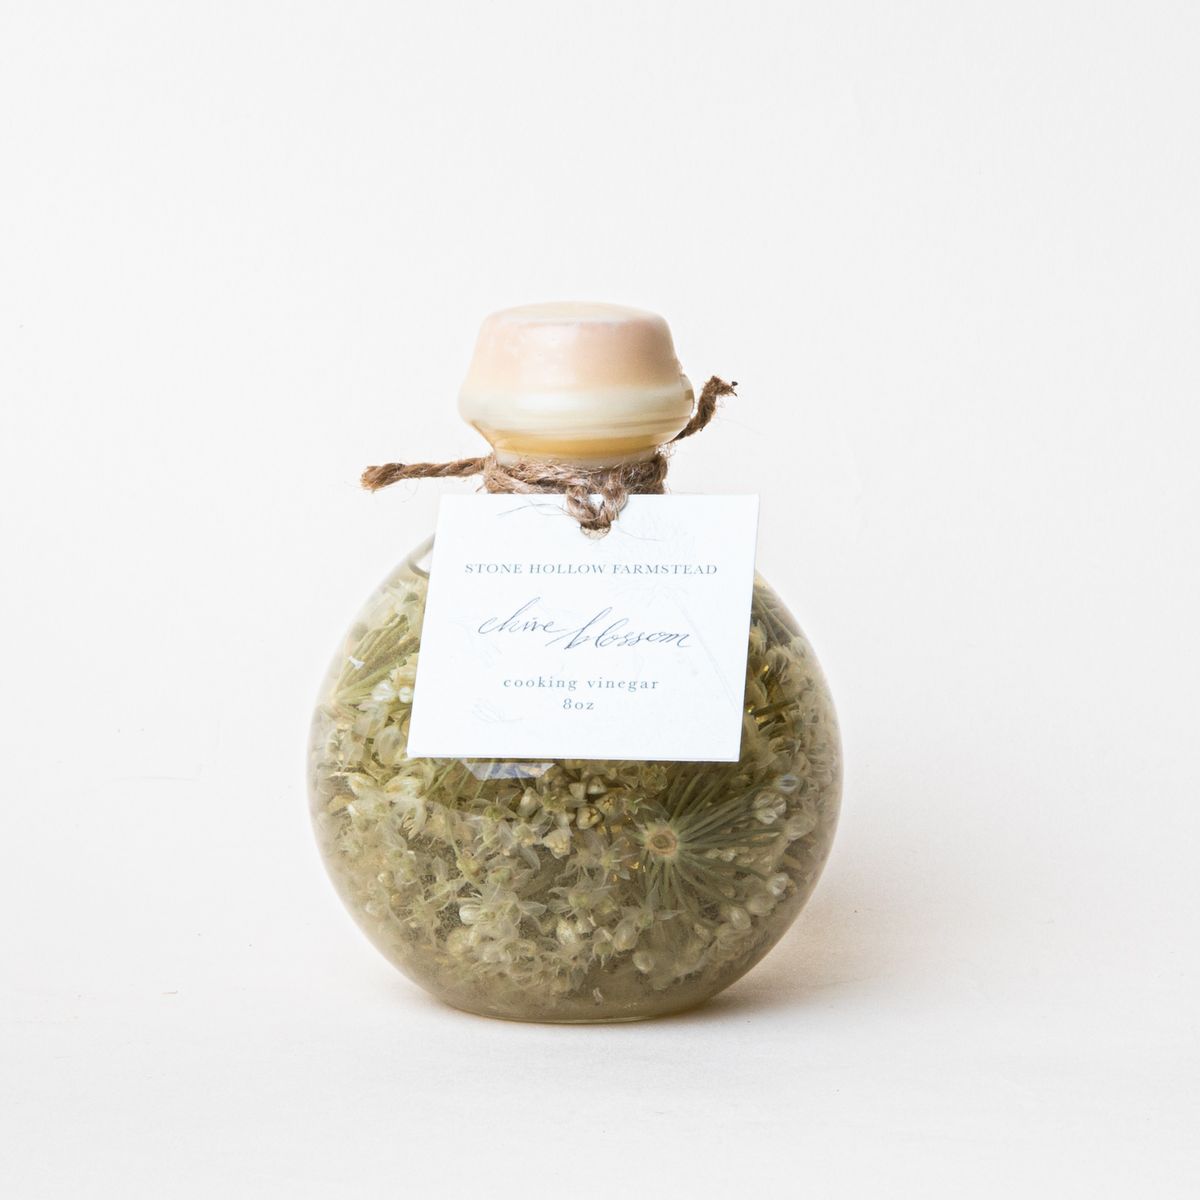 Round jar filled with flowery liquid in a sage green color with a wooden cap and a small white label